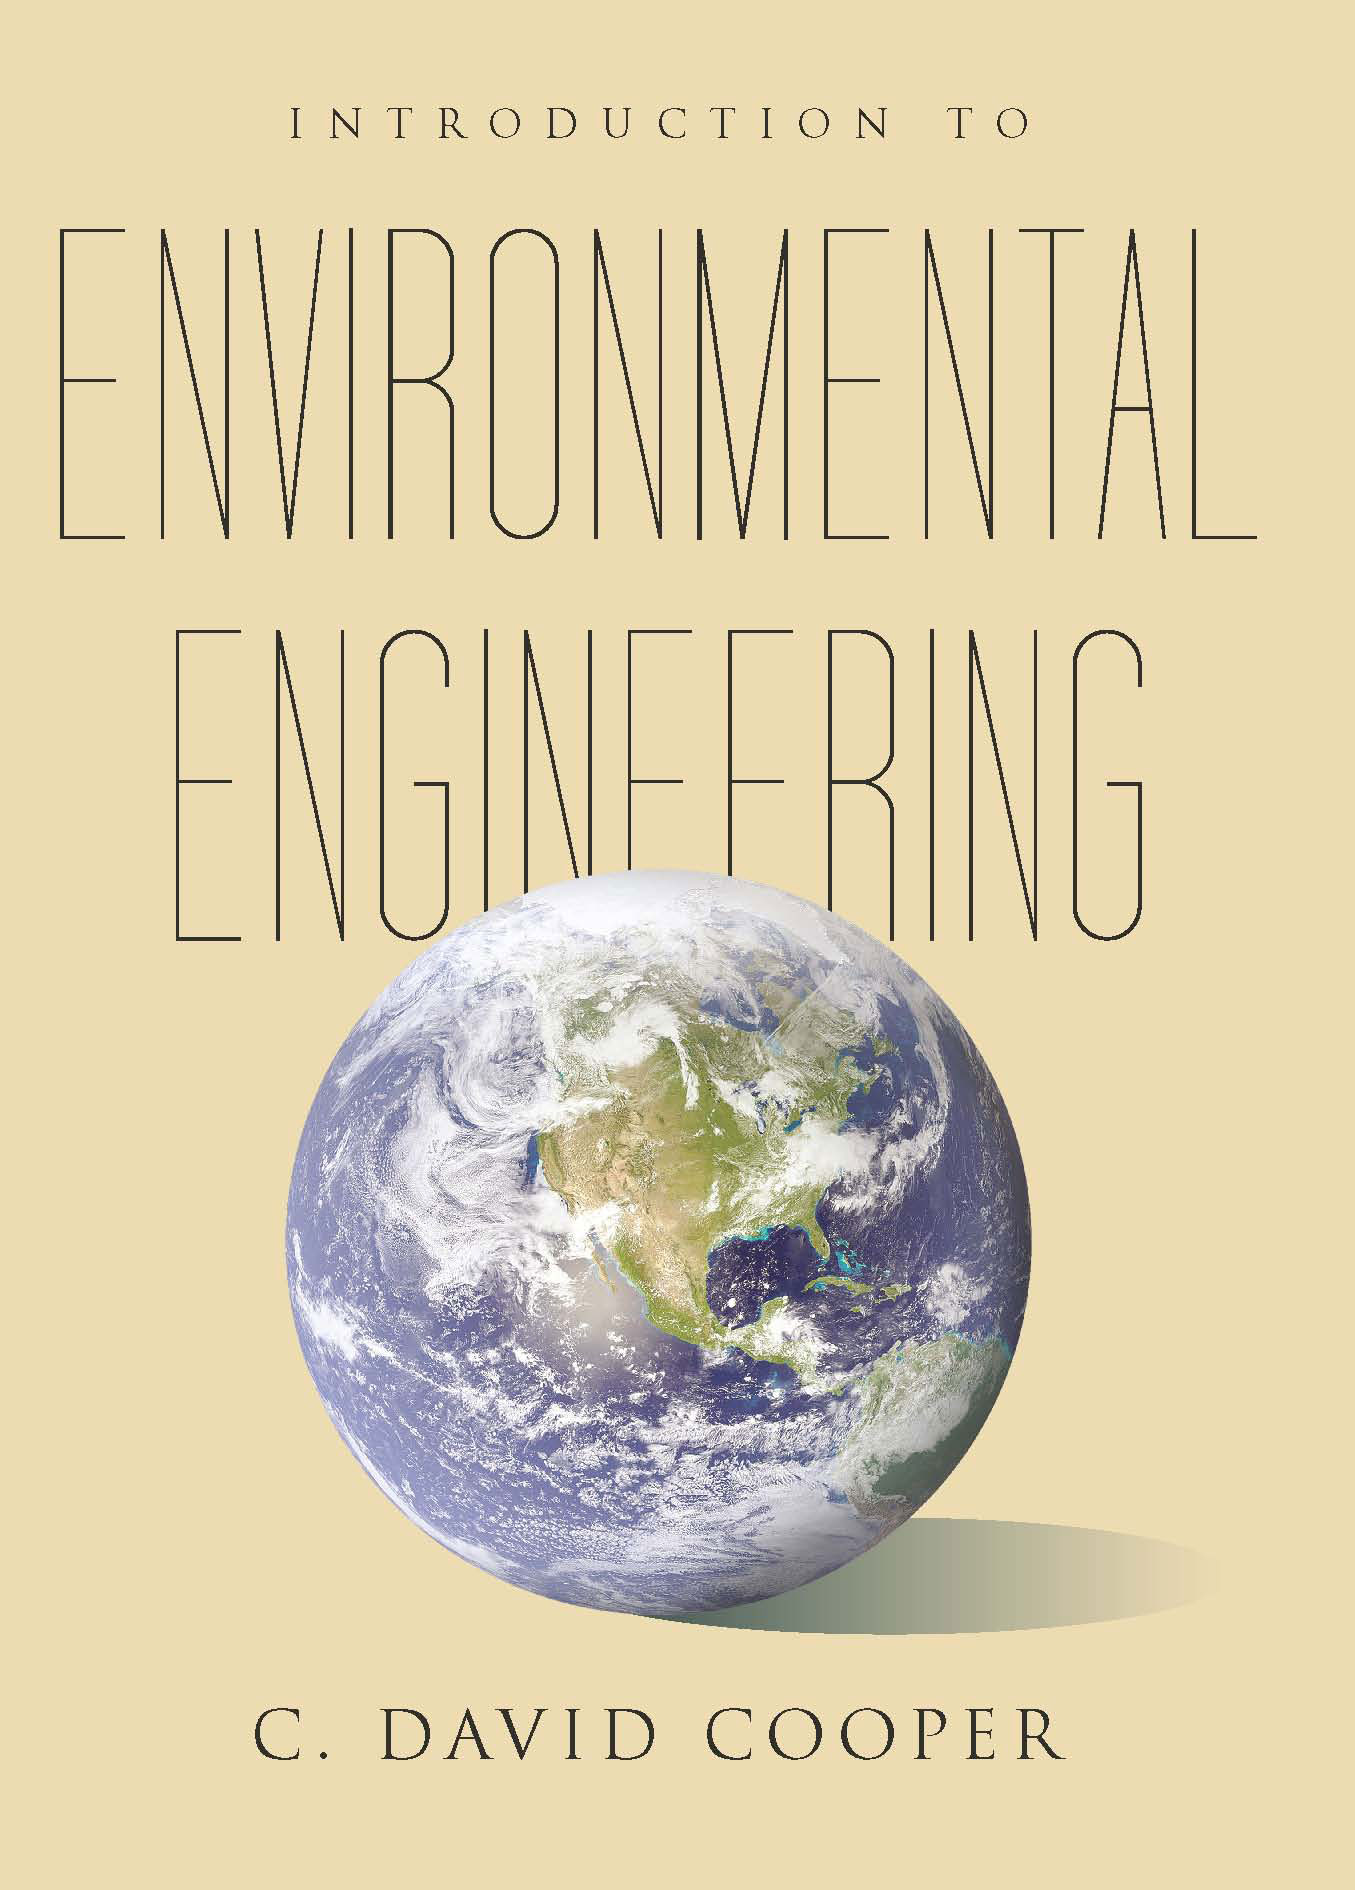 Introduction to Environmental Engineering:  by C. David Cooper